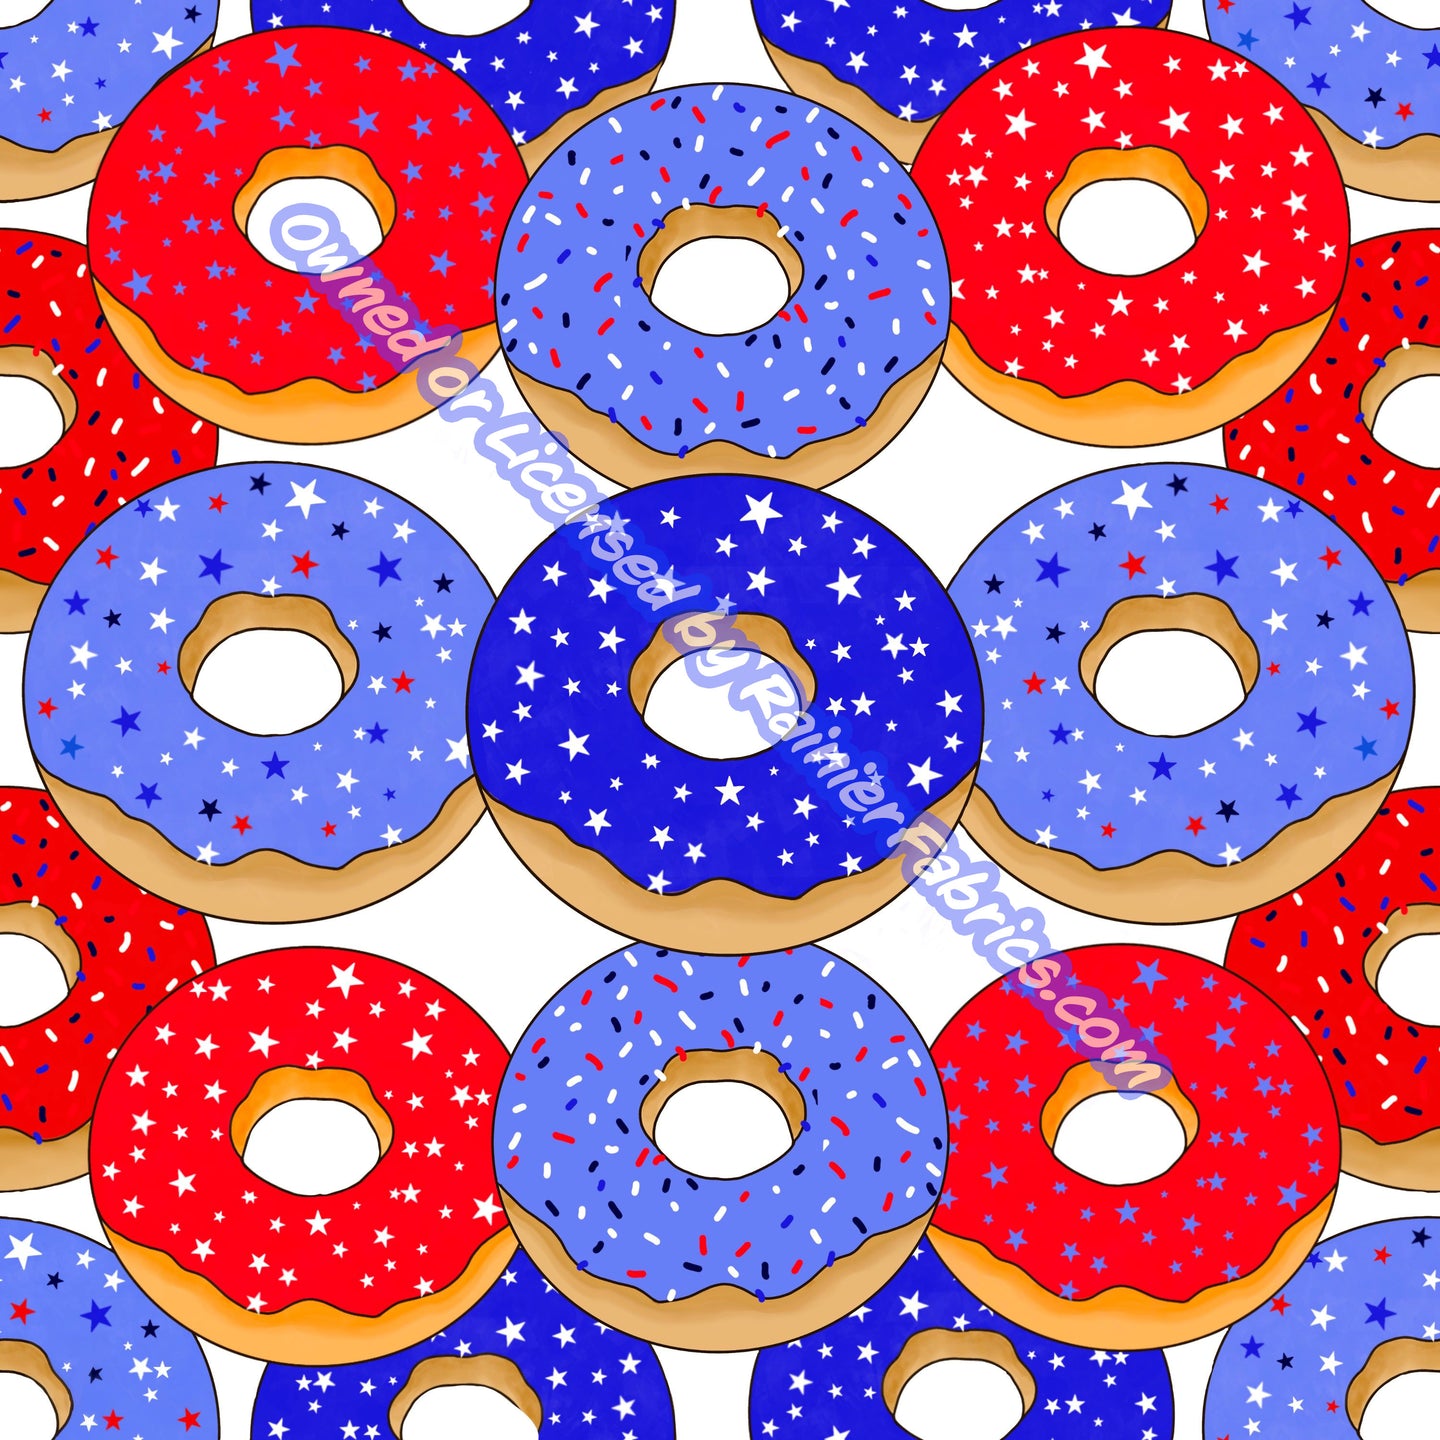 Donut Day from Sarah - 2-5 day turnaround - Order by 1/2 yard; Description of bases below